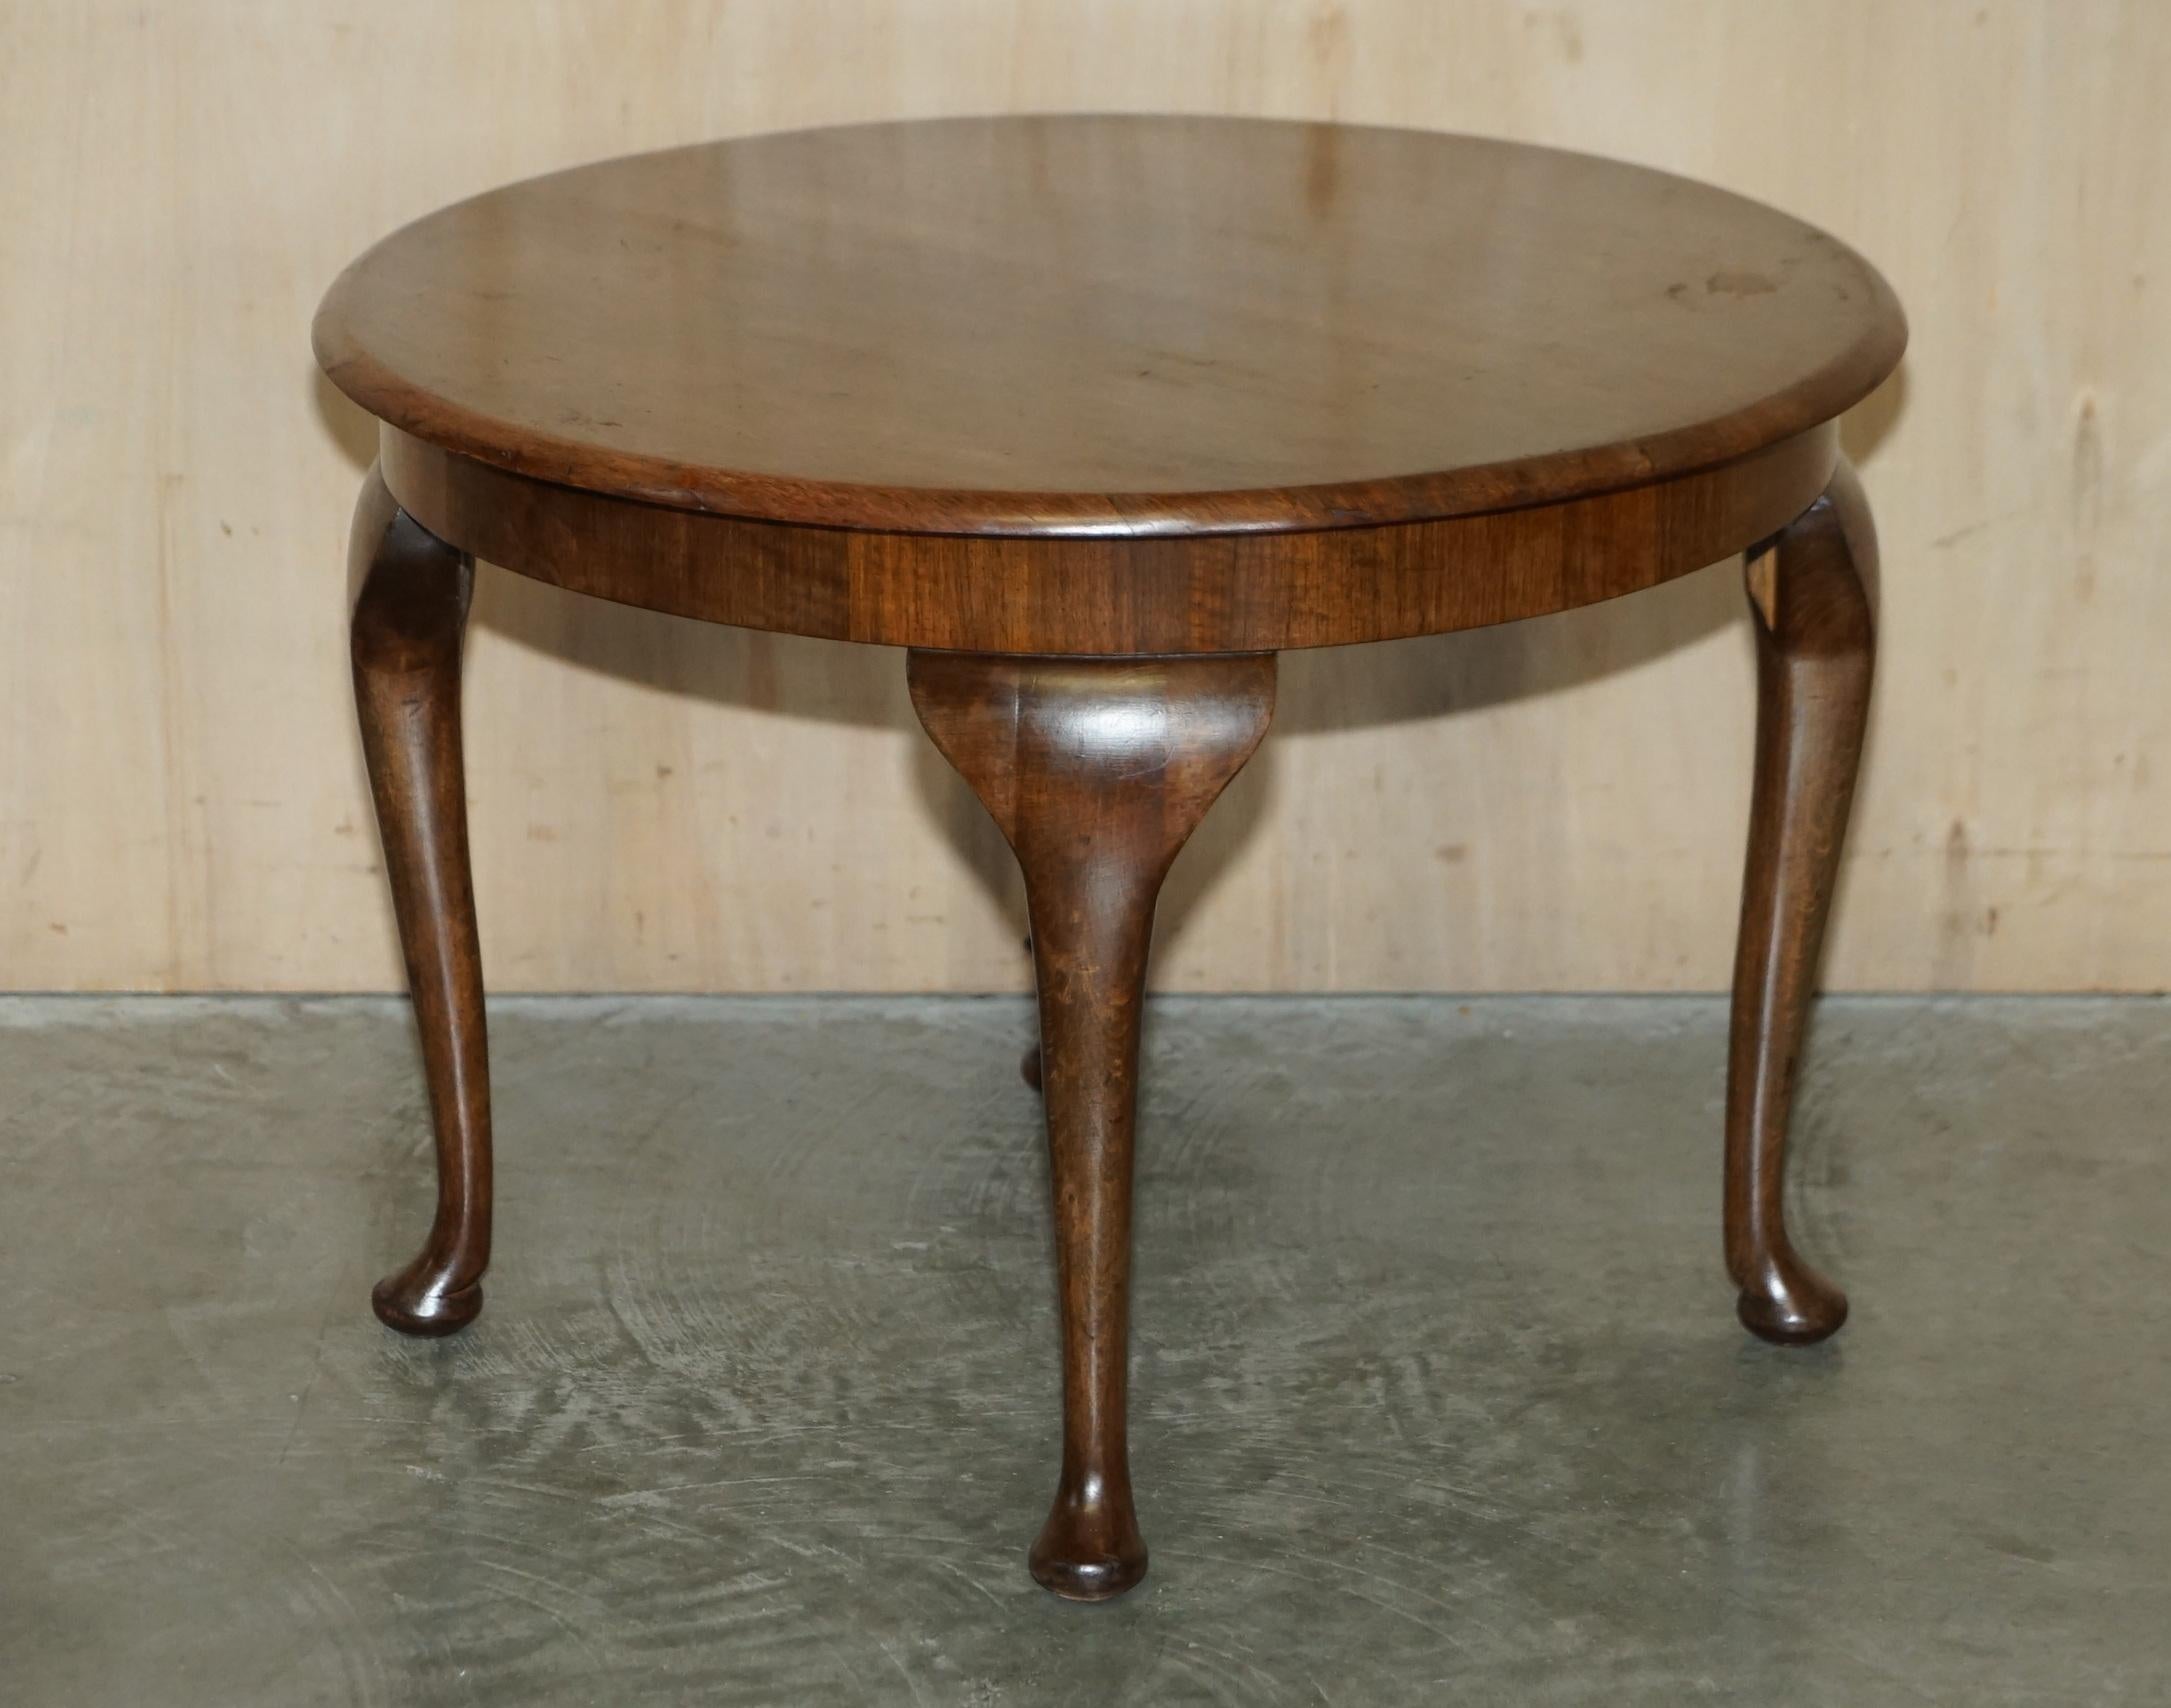 We are delighted to offer for sale this lovely vintage circa 1930 hand carved English oak coffee table 

A good looking well made English coffee table with nice cabriolet legs

Condition wise it has aged well, there are patina marks all over the